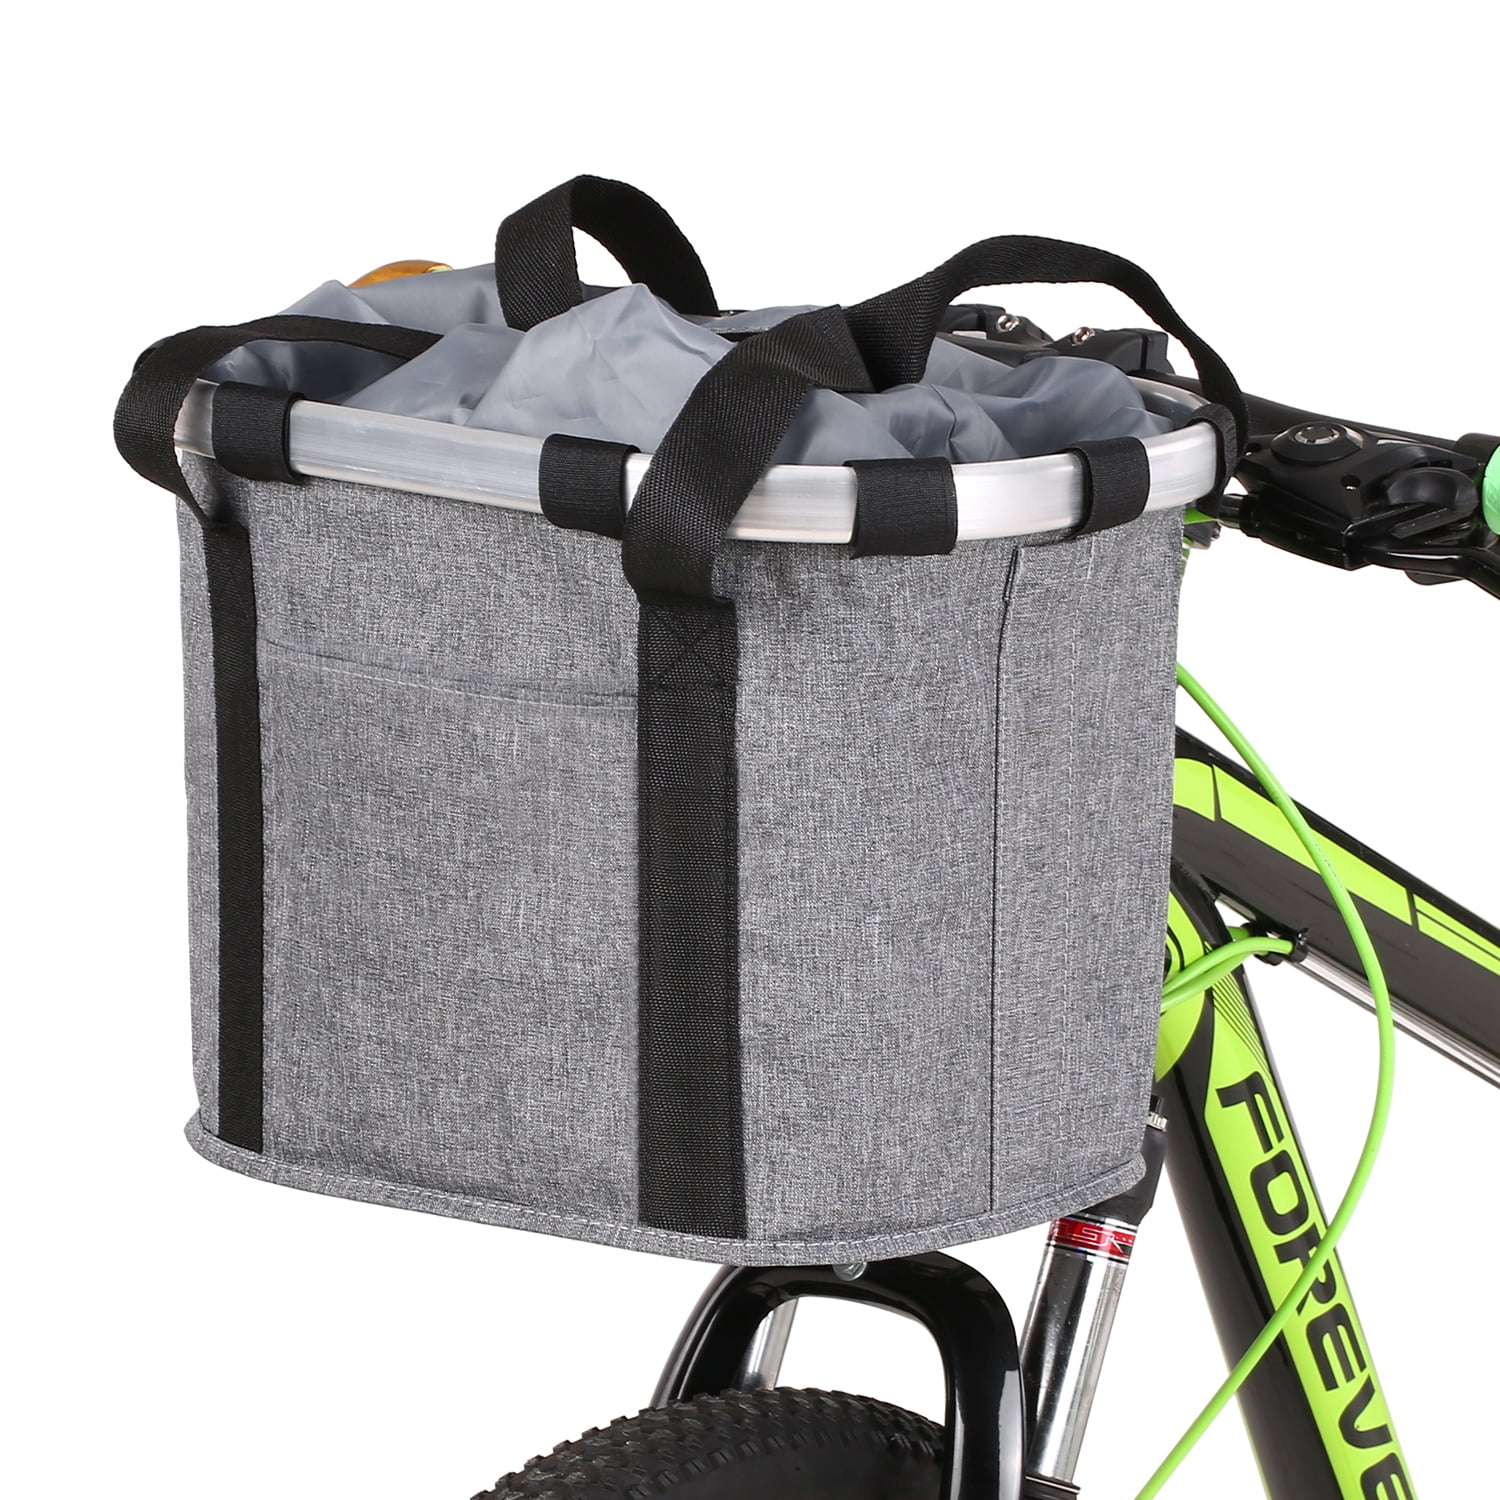 Portable Collapsible Dog Cat Bicycle Front Basket Bike Handlebar Carrier Cage for up to 22lbs Pet Folding Detachable Cycling Bag Black